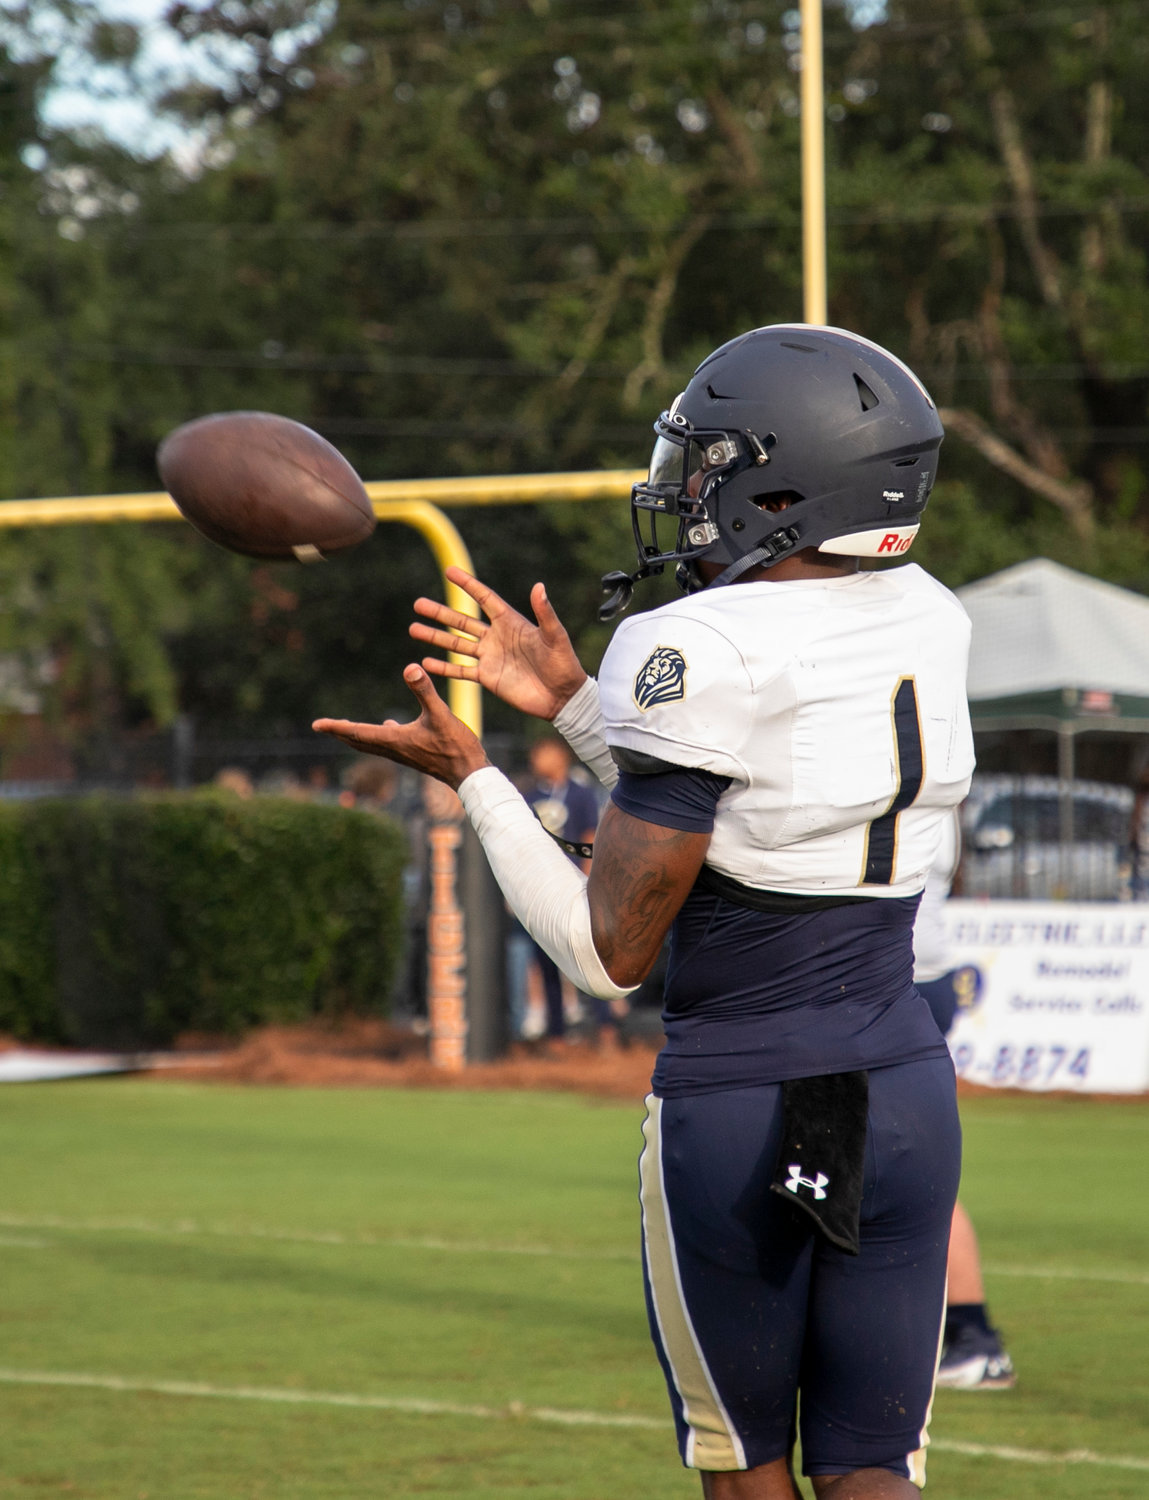 Foley receiver Perry Thompson looks in a catch during warmups before the Lions' non-region game against the Baldwin County Tigers Aug. 26 in Bay Minette. The Alabama commit hauled in three touchdowns Friday night to help the Lions beat MGM 43-42 in overtime to open region play.